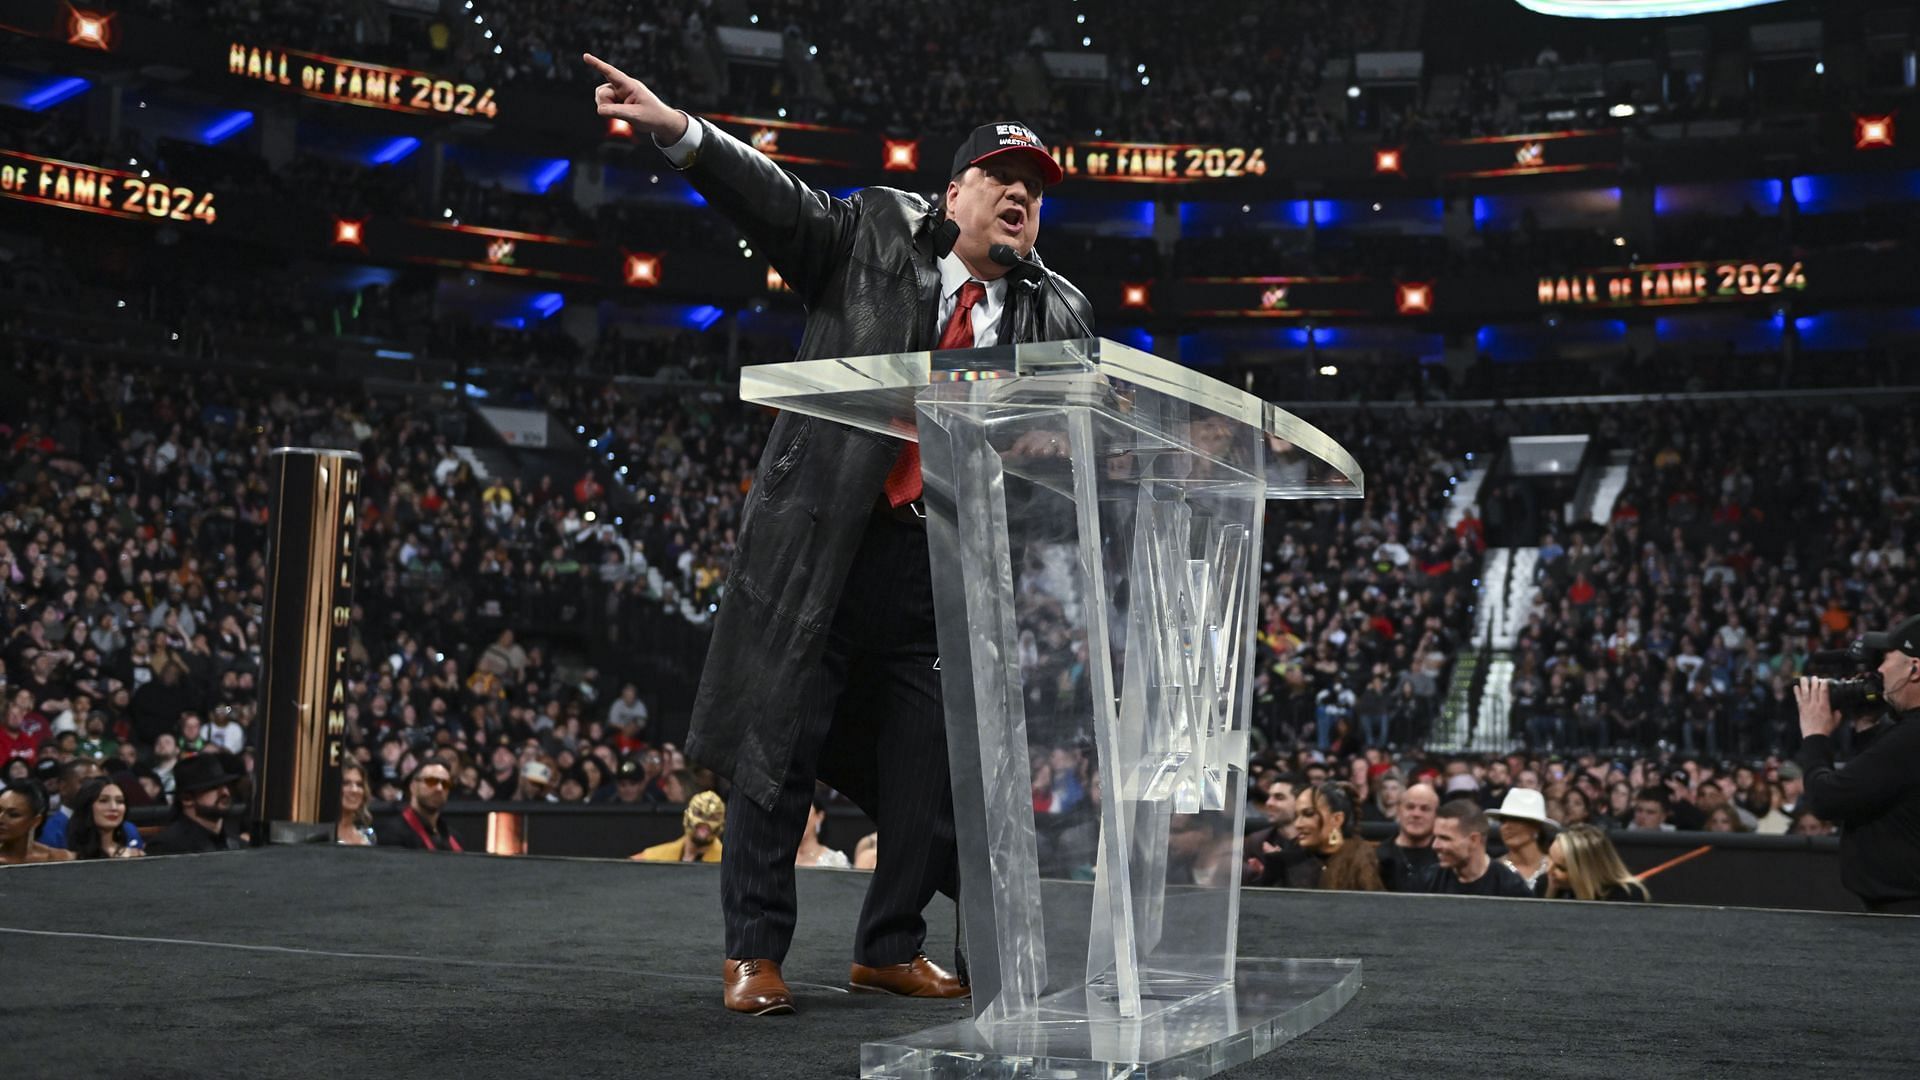 Paul Heyman is inducted into the WWE Hall of Fame, 2024 Class